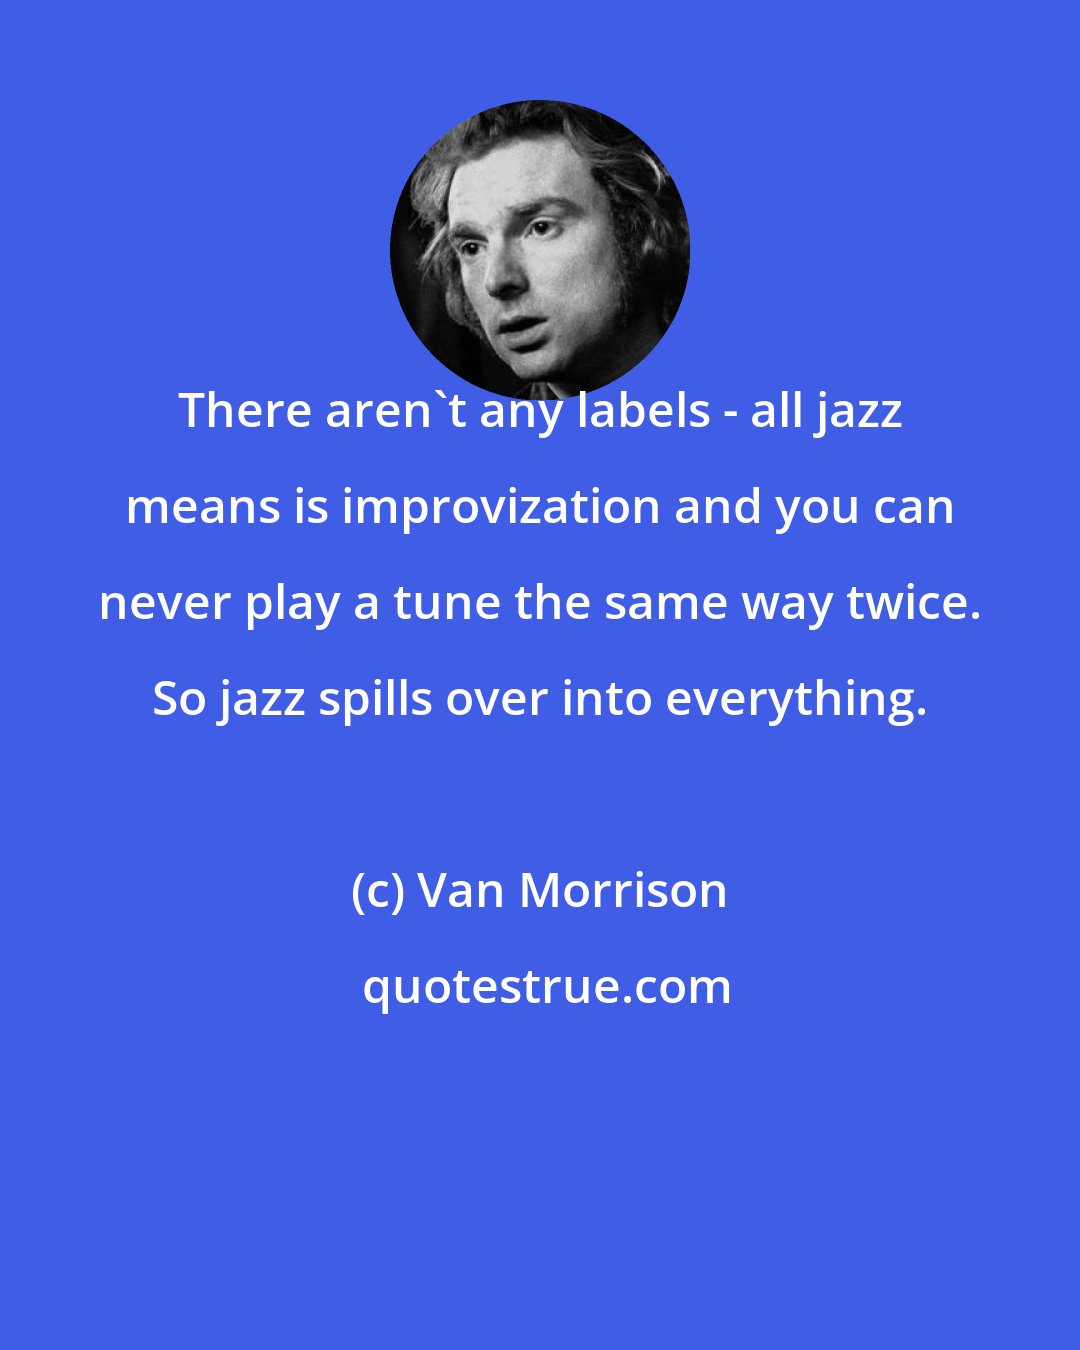 Van Morrison: There aren't any labels - all jazz means is improvization and you can never play a tune the same way twice. So jazz spills over into everything.